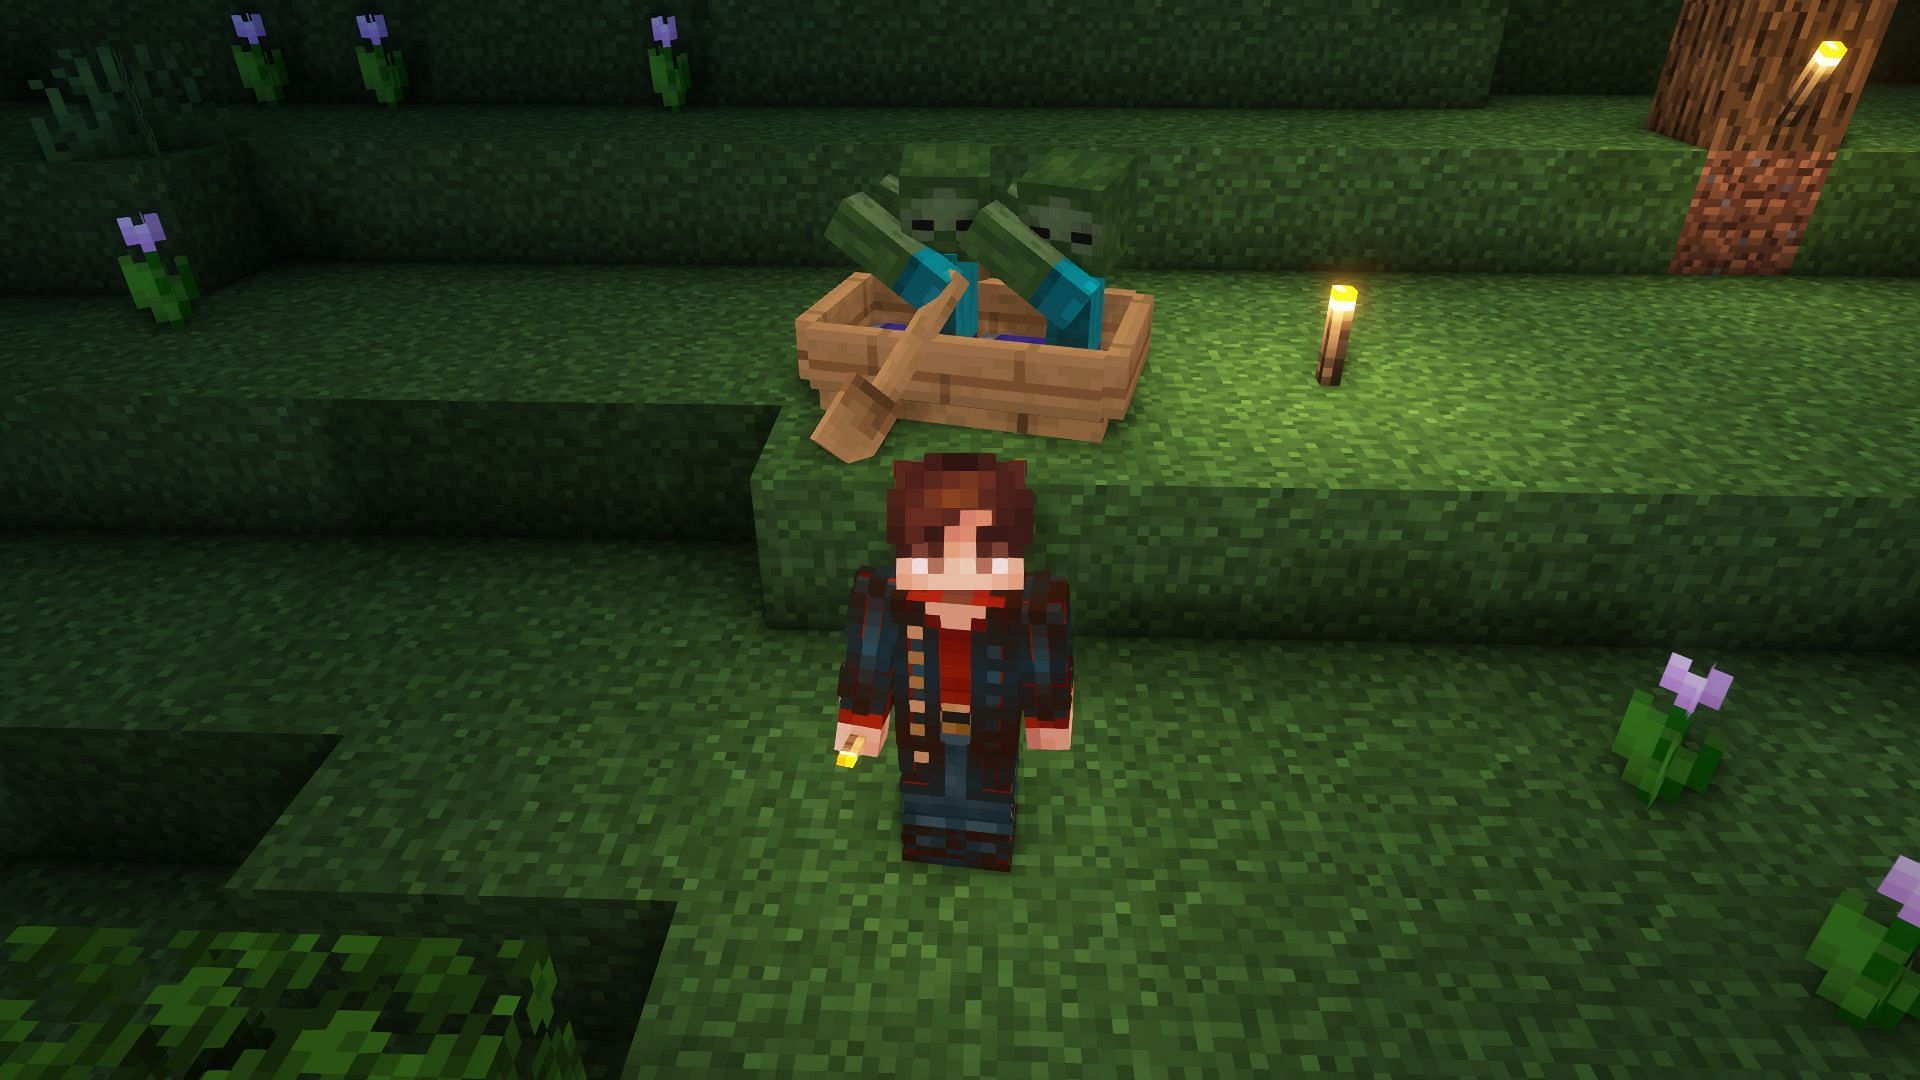 Zombies trapped in a boat (Image via Mojang)